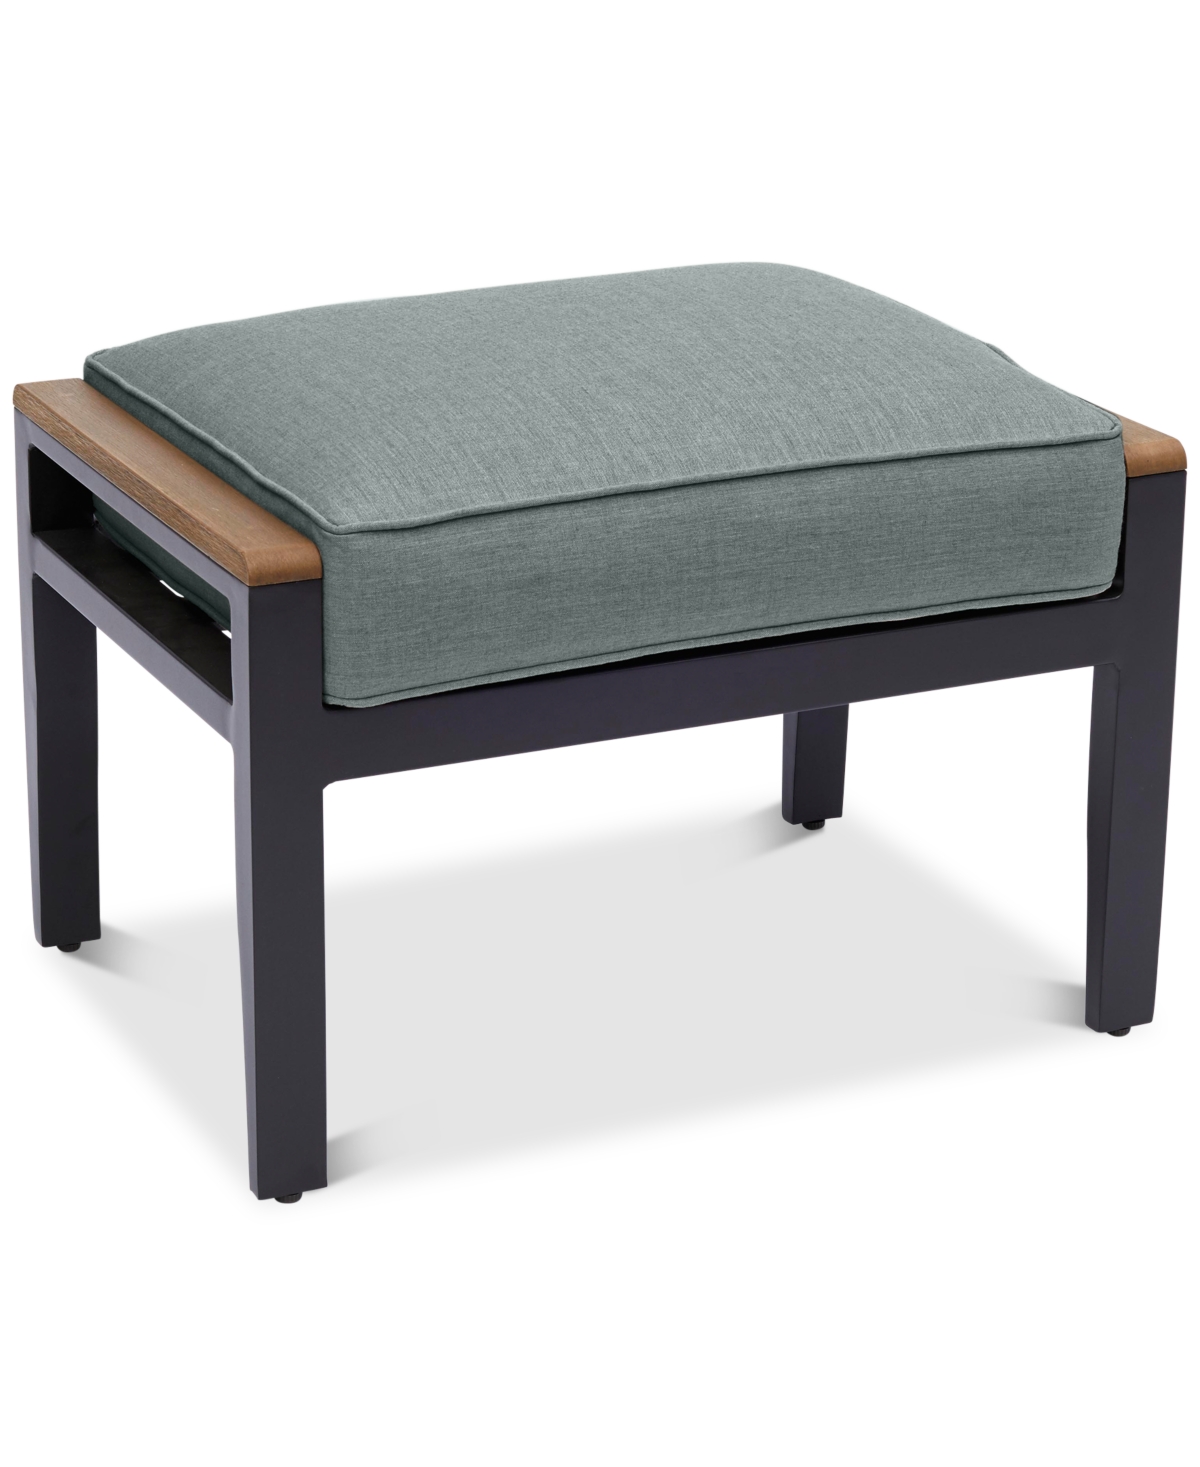 10404140 Stockholm Outdoor Ottoman with Outdoor Cushion, Cr sku 10404140